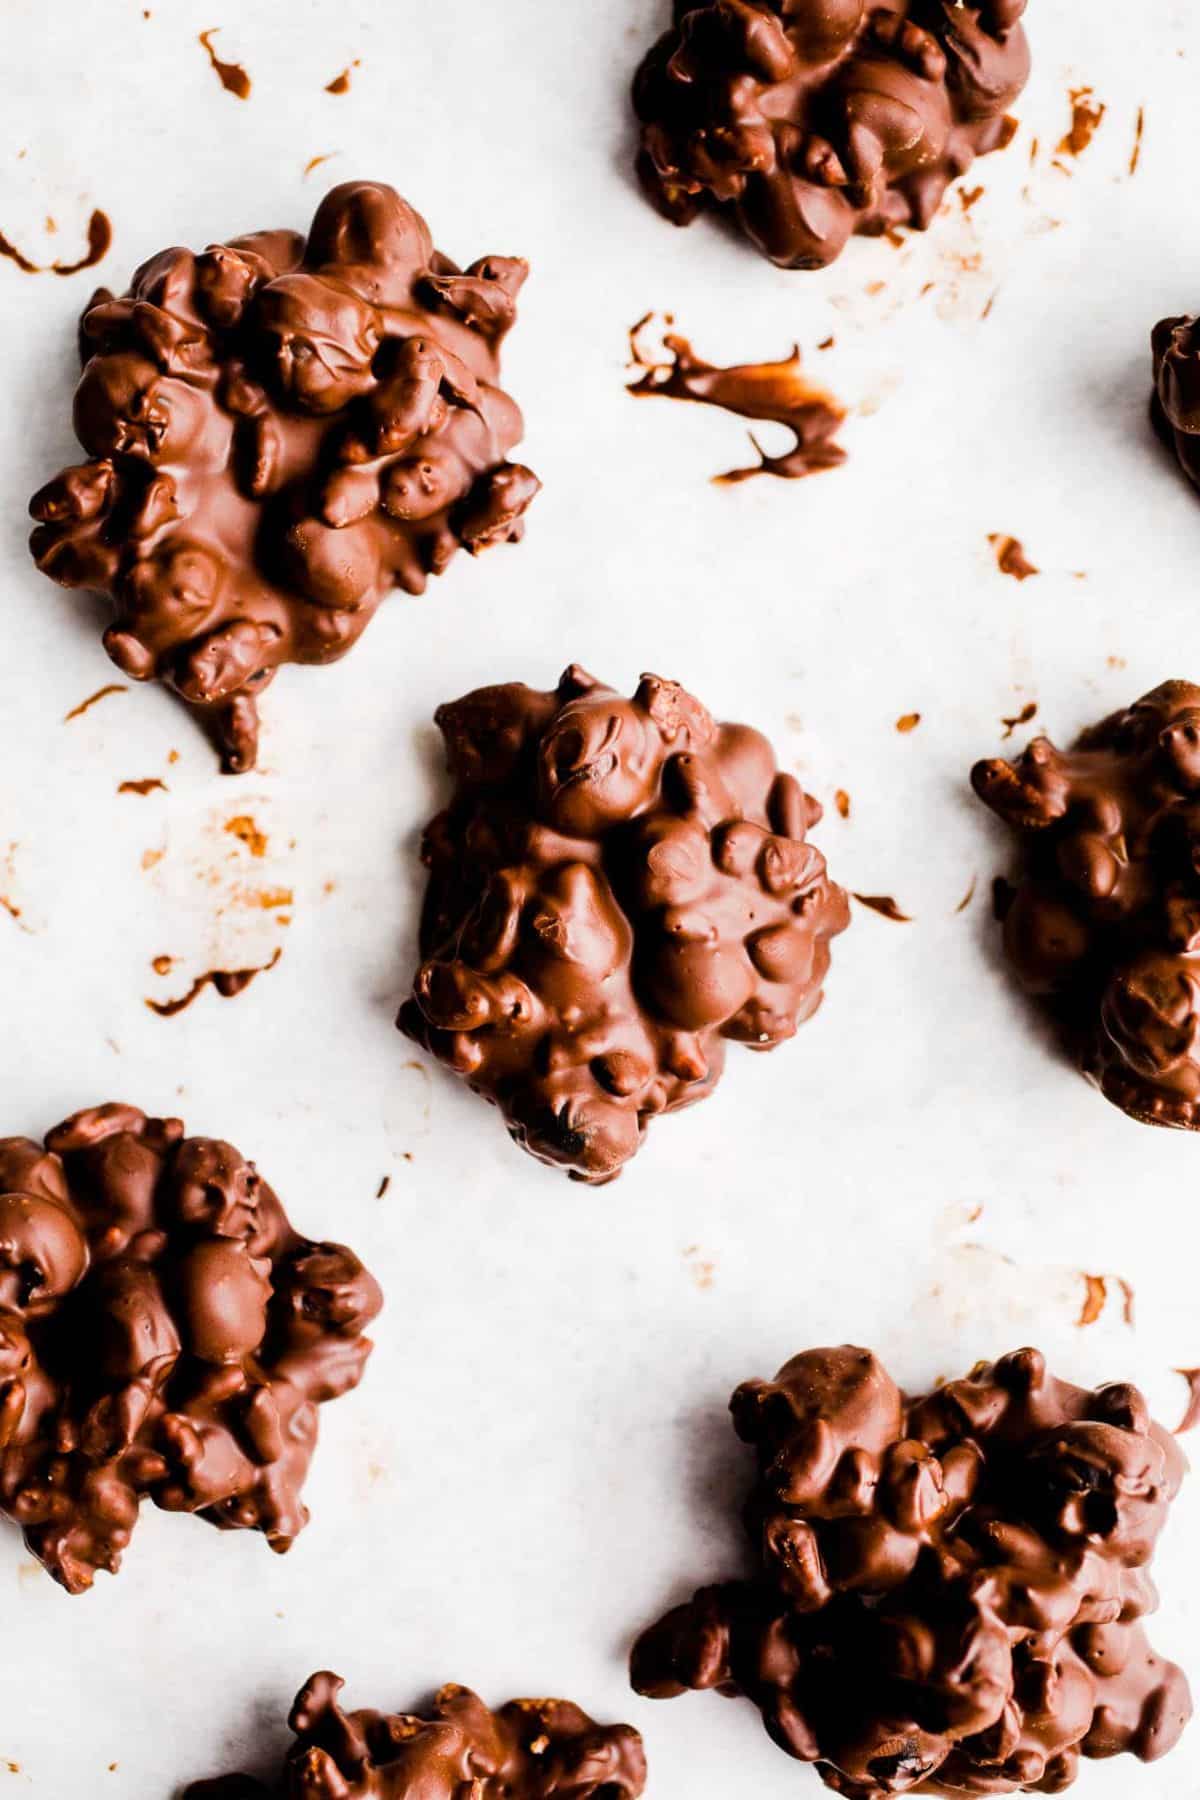 Dairy-free Chocolate Blueberry Clusters.